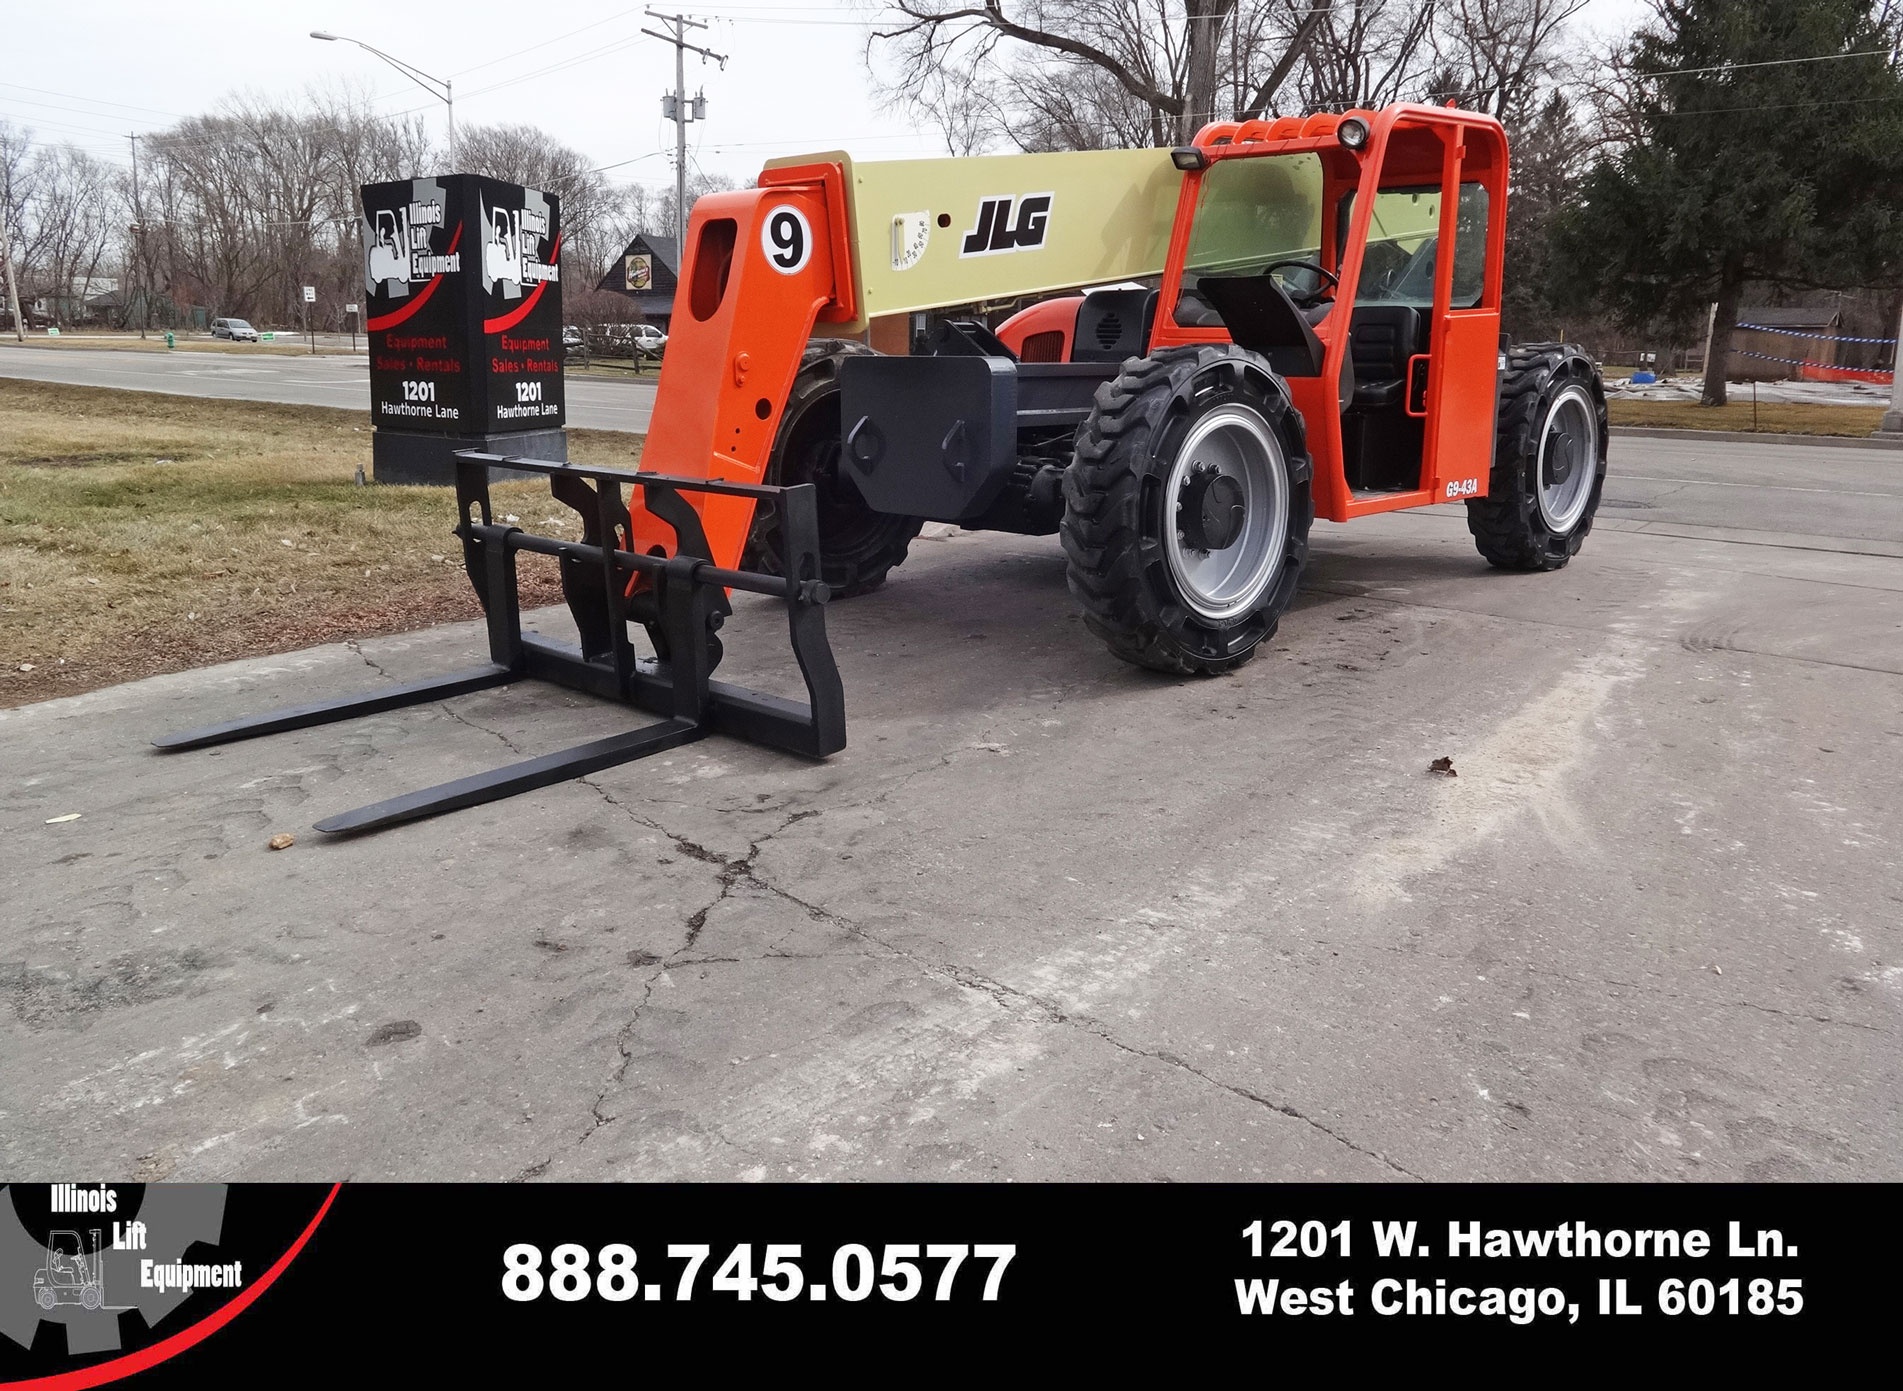 Used 2007 JLG G9-43A  | Cary, IL